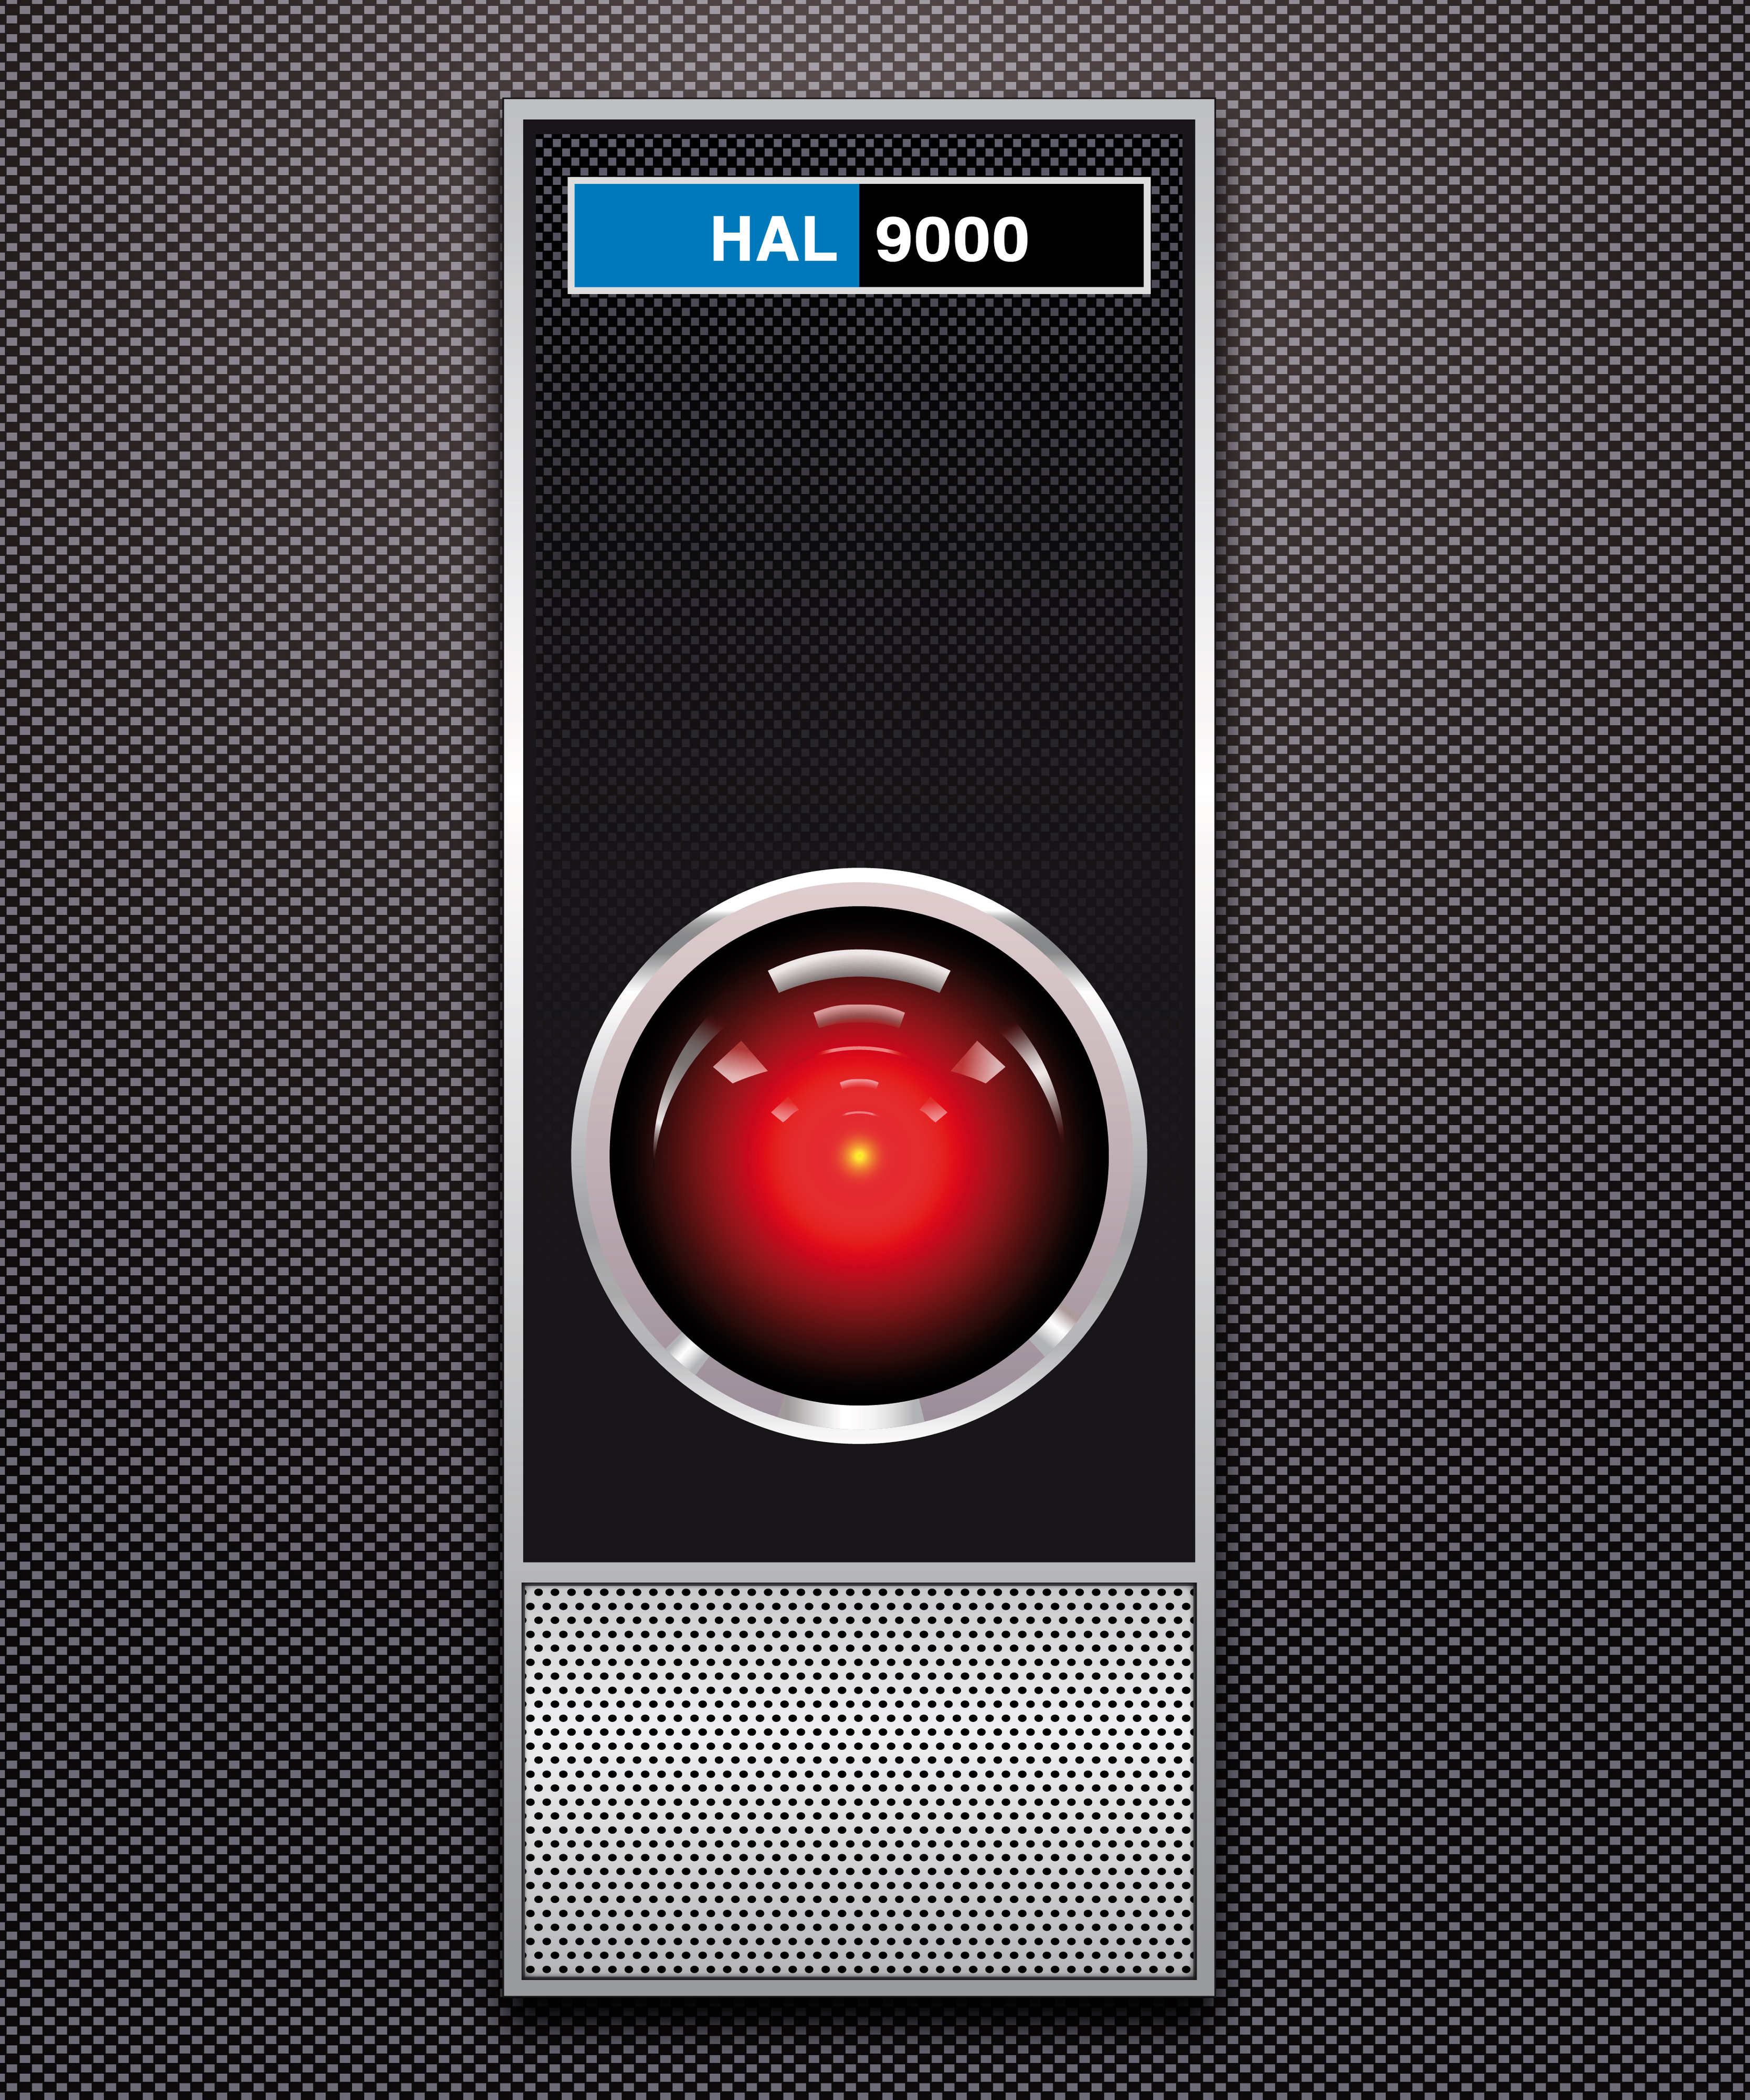 hal_9000___2001_a_space_odyssey_by_pascal808-d57bhl7.jpg